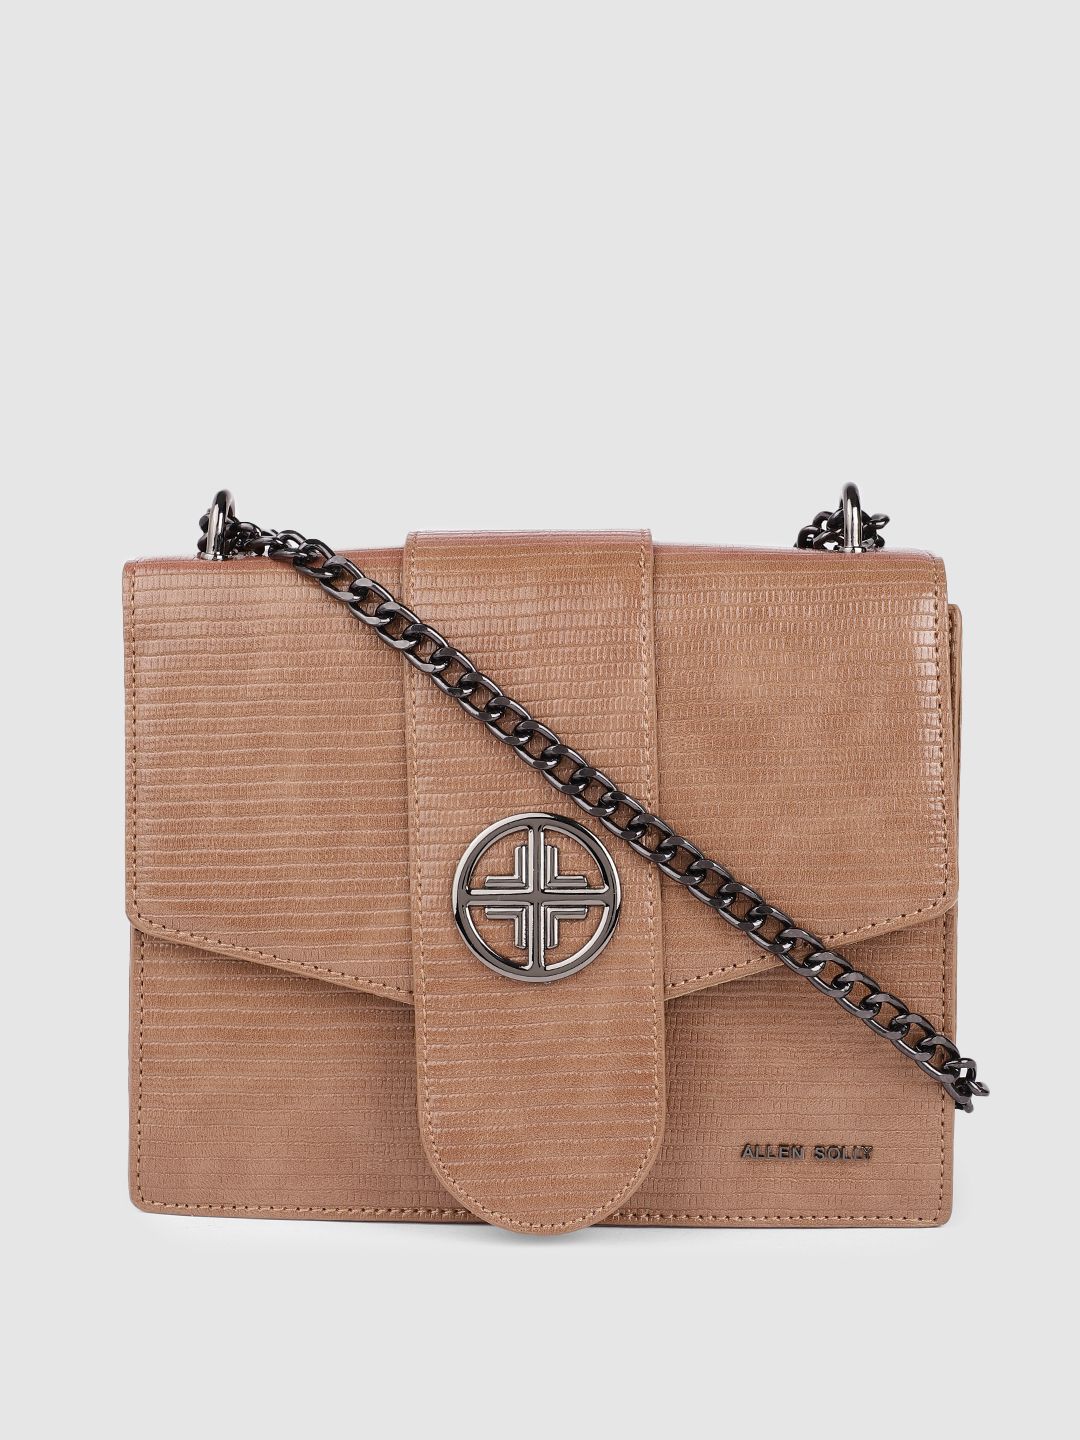 Allen Solly Camel Brown Textured PU Structured Sling Bag Price in India